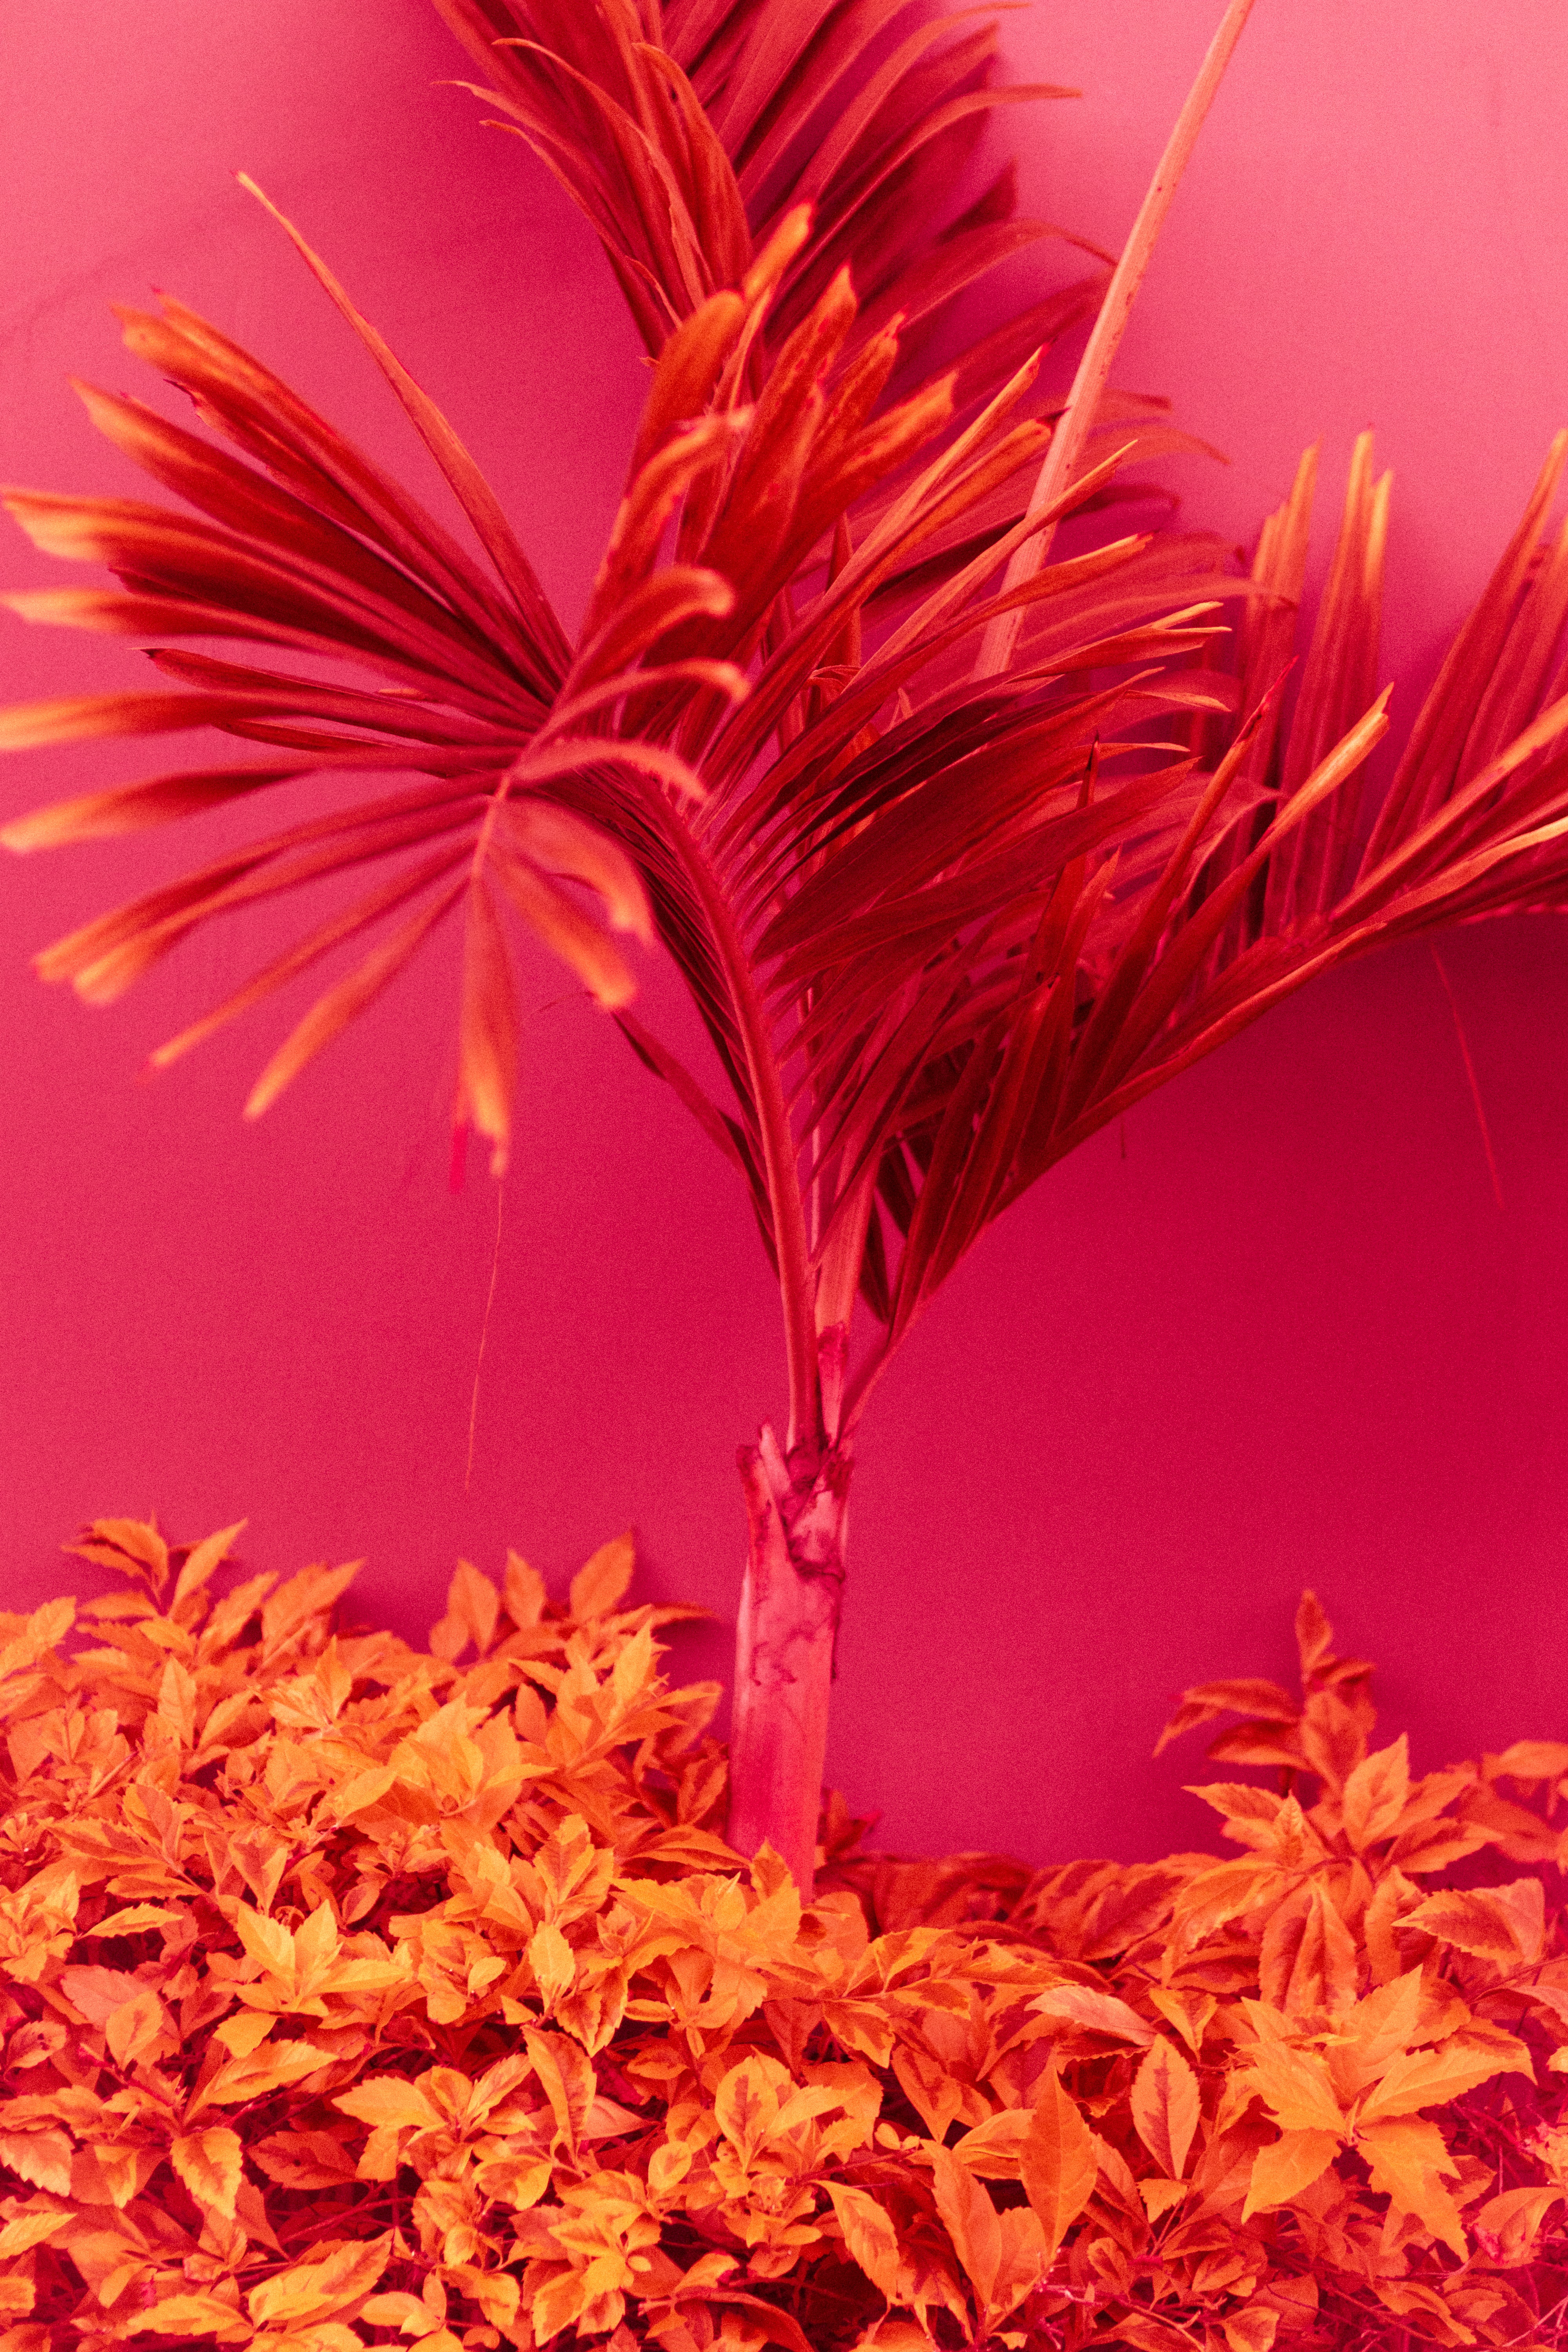 A fern plant lit in yellow against a pink background